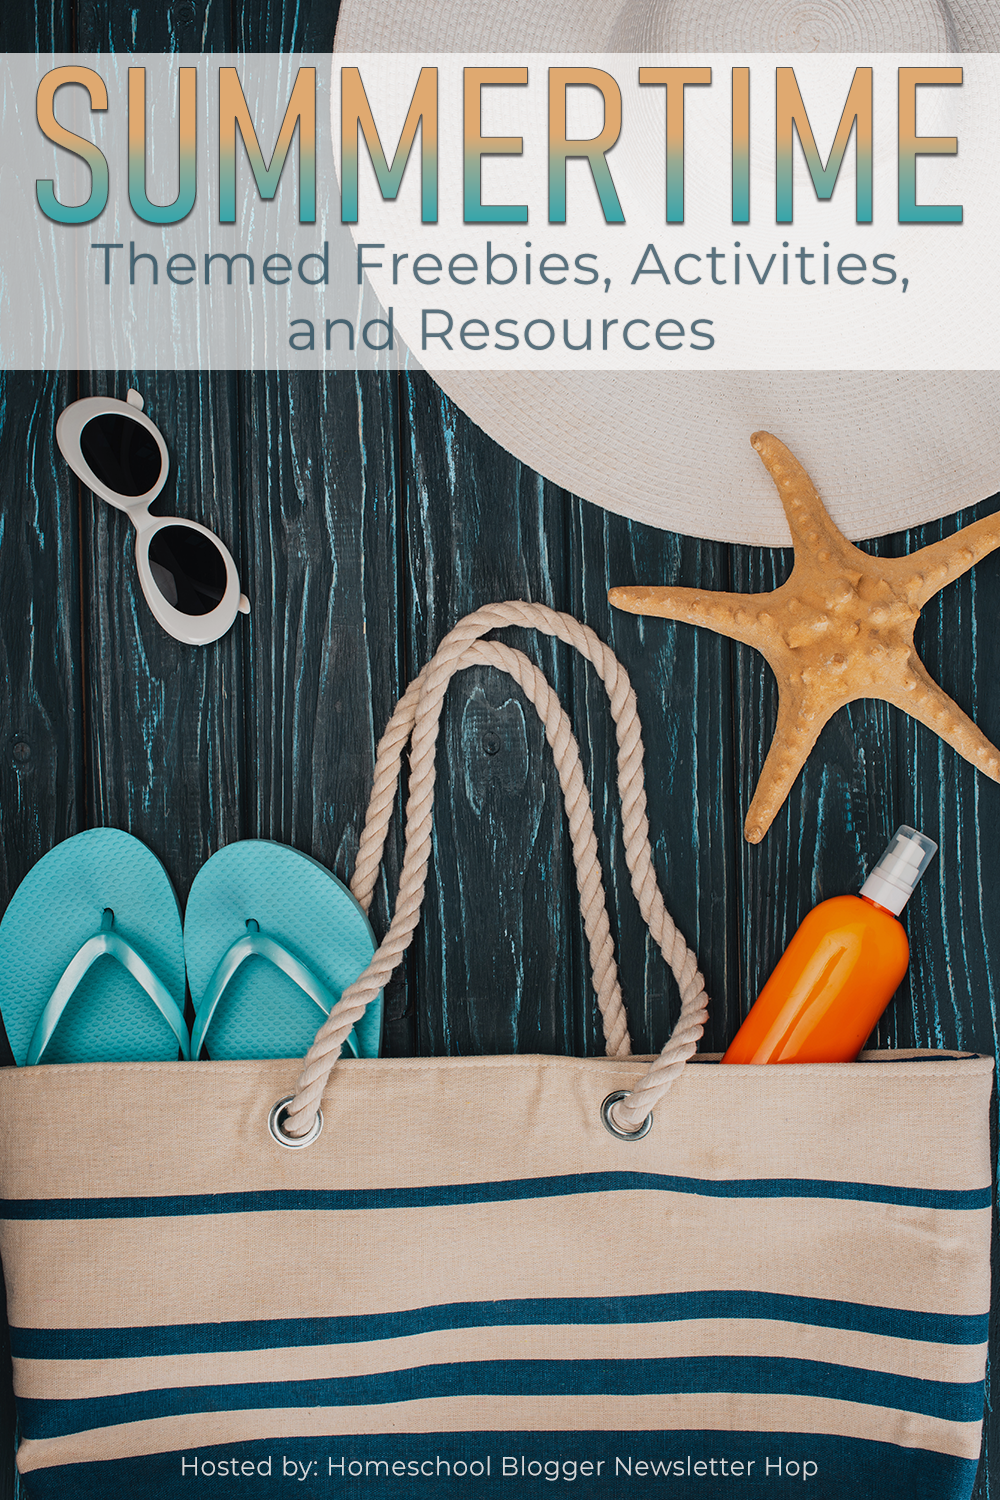 Summertime fun: themed freebies, activities, and resources